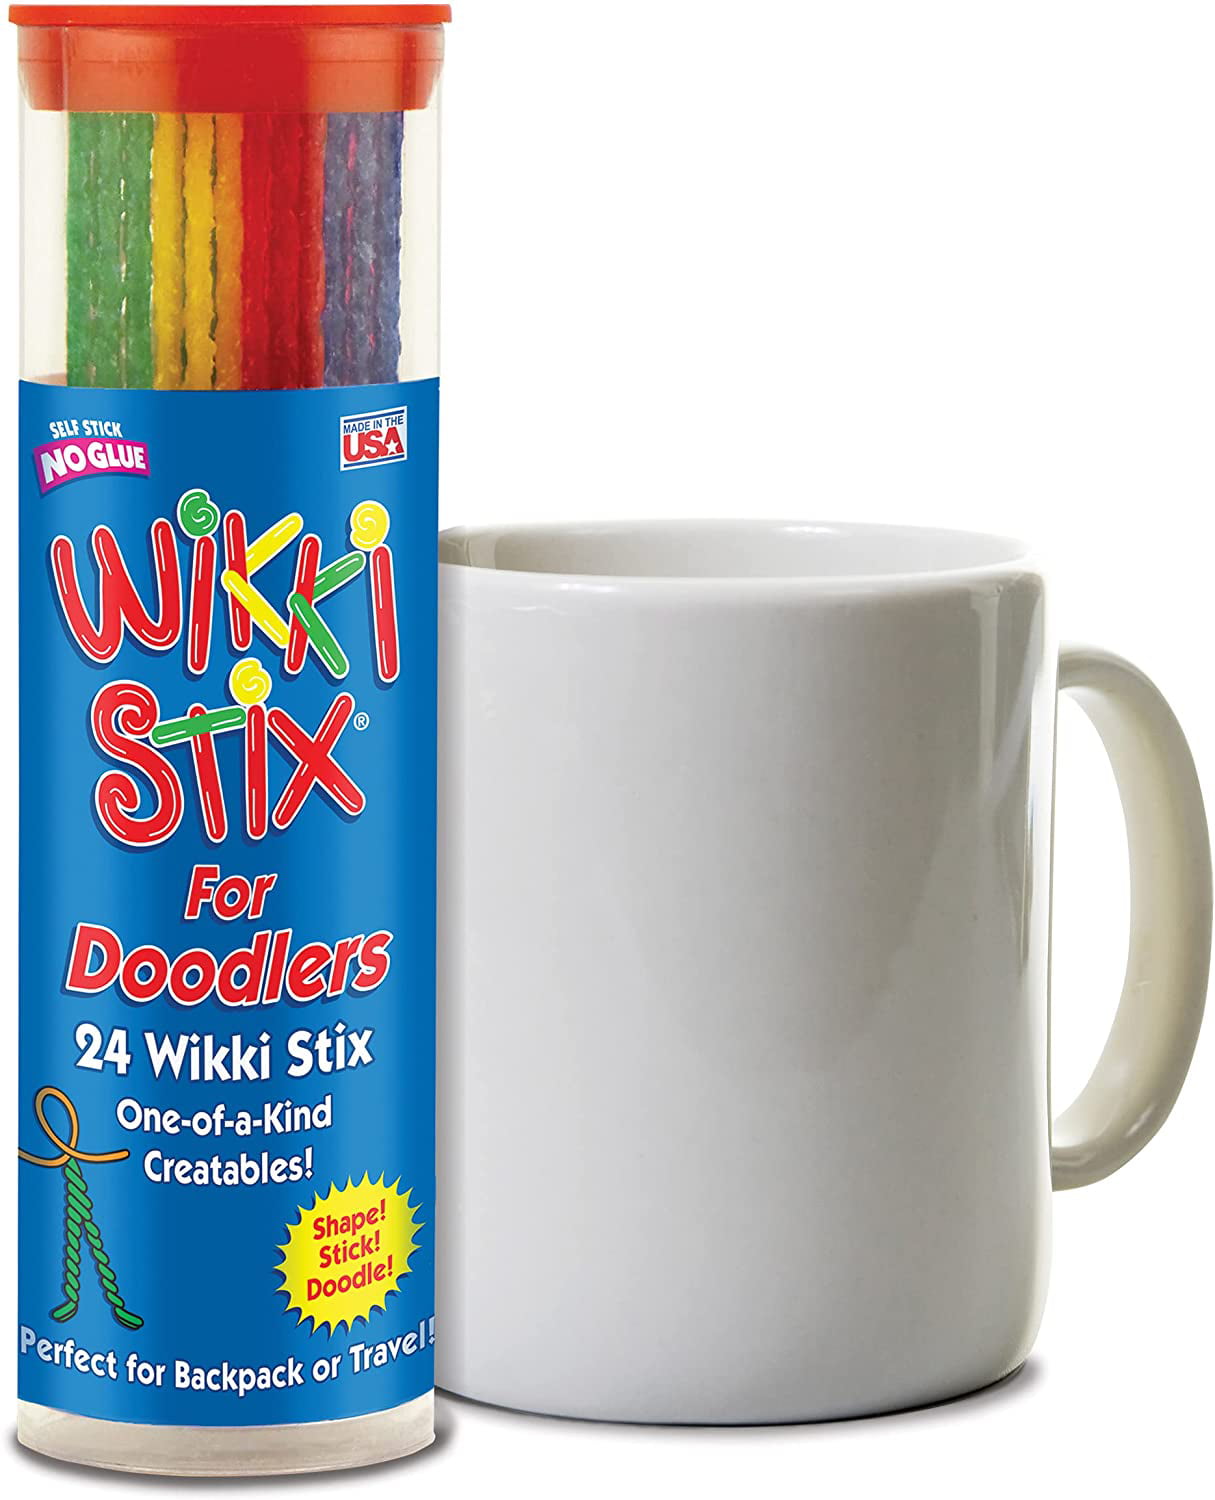 Sensory Fidget Toy, Arts and Crafts for Kids, Non-Toxic, Waxed Yarn, 6  inch, Reusable Molding and Sculpting Sticks, American Made by Wikki Stix,  Assorted Colors, 24 Pack,Multi. 